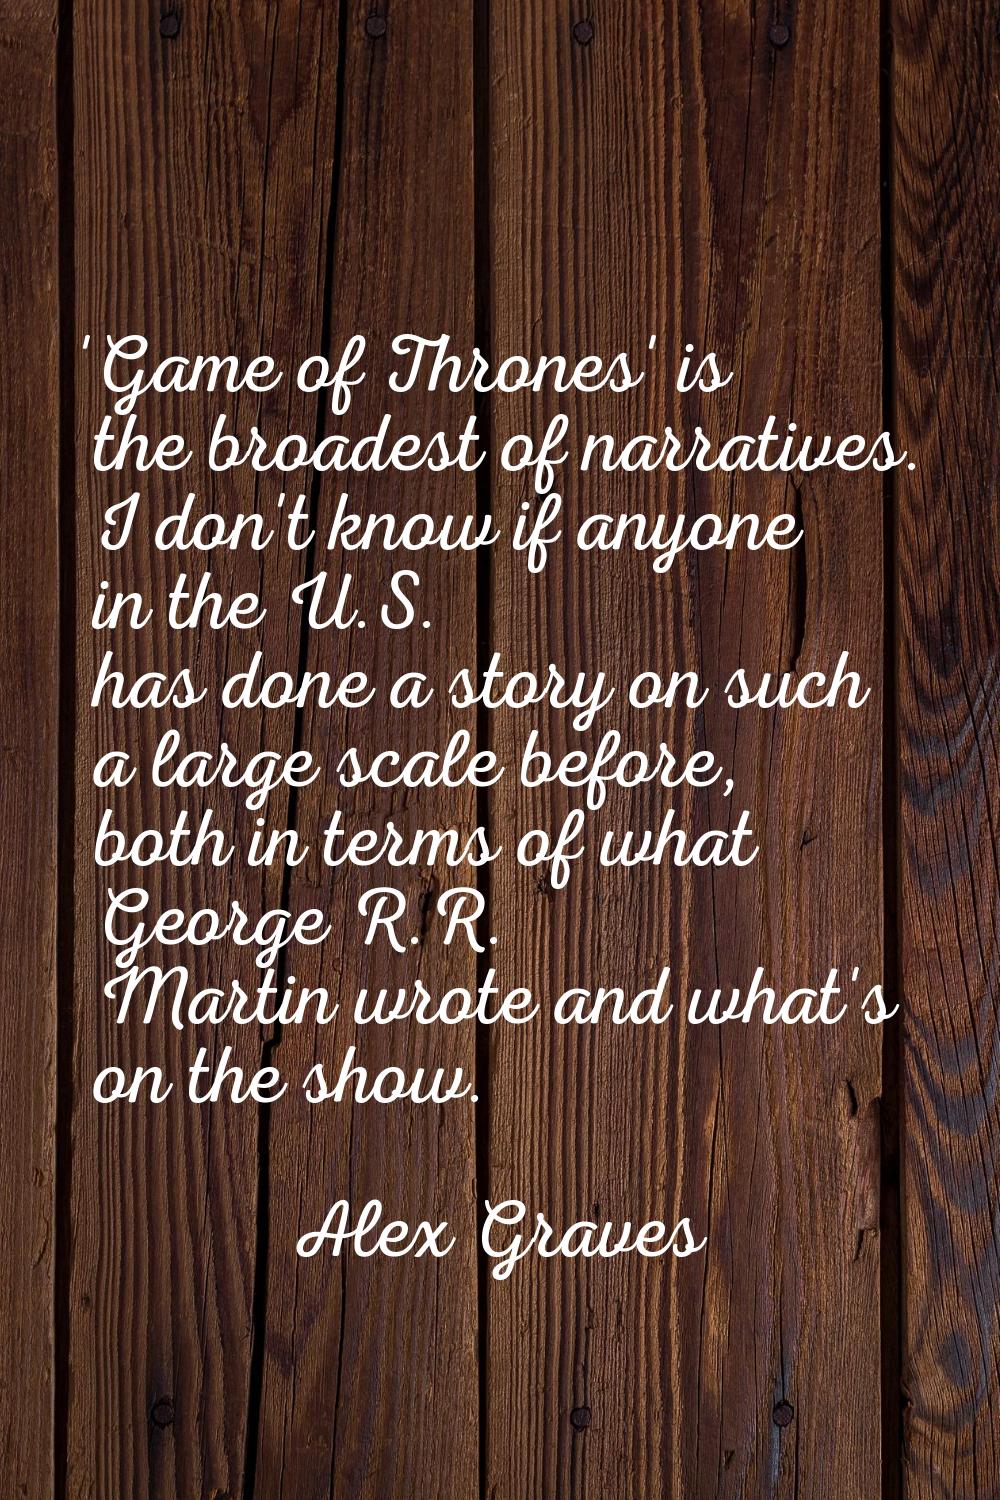 'Game of Thrones' is the broadest of narratives. I don't know if anyone in the U.S. has done a stor